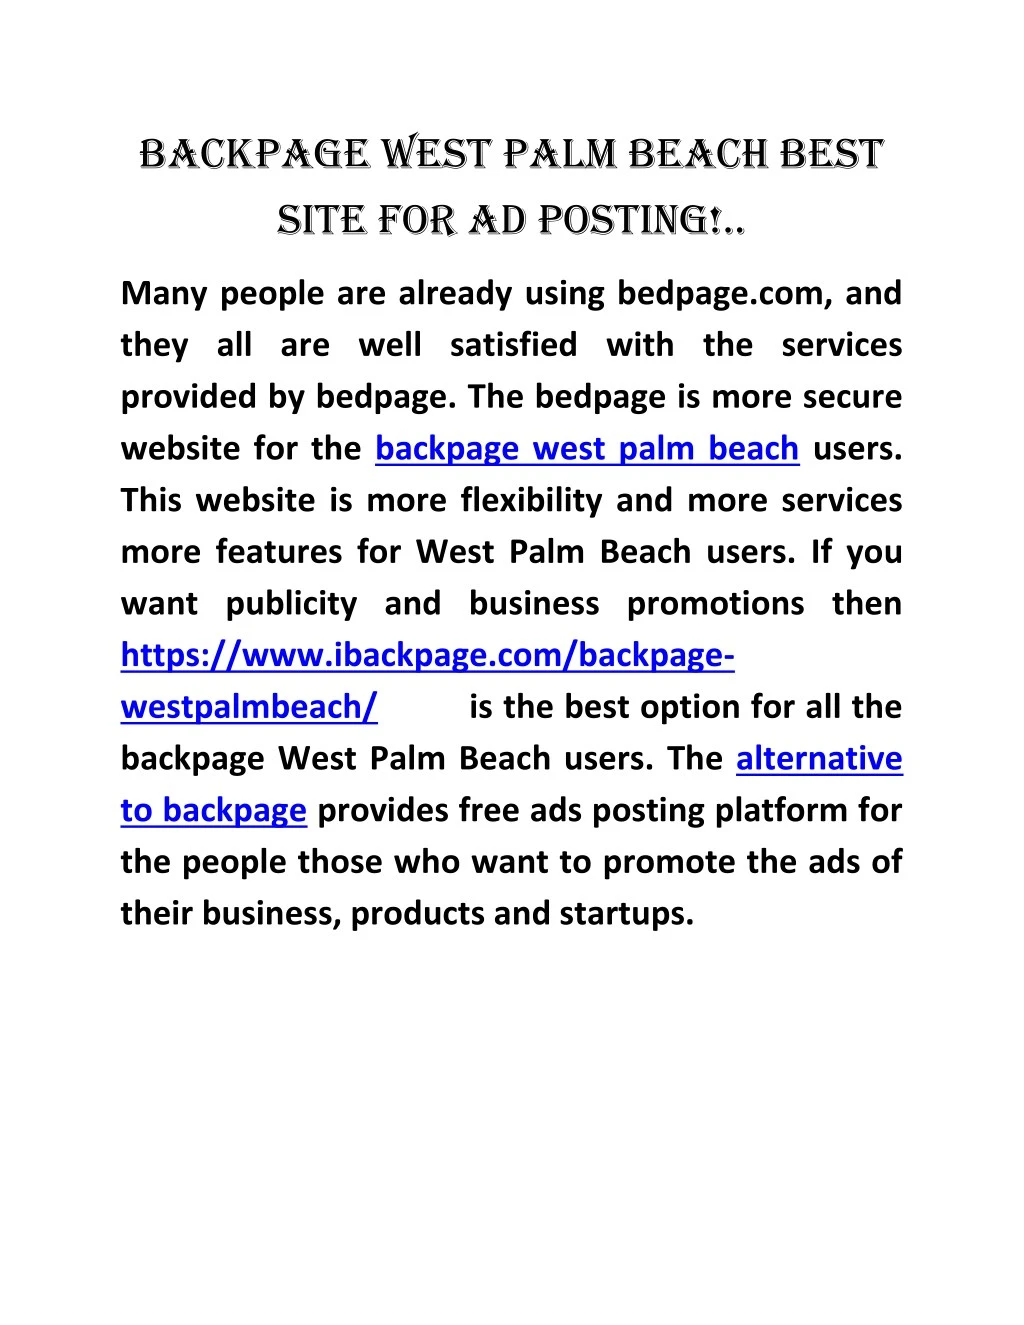 backpage west palm beach best site for ad posting